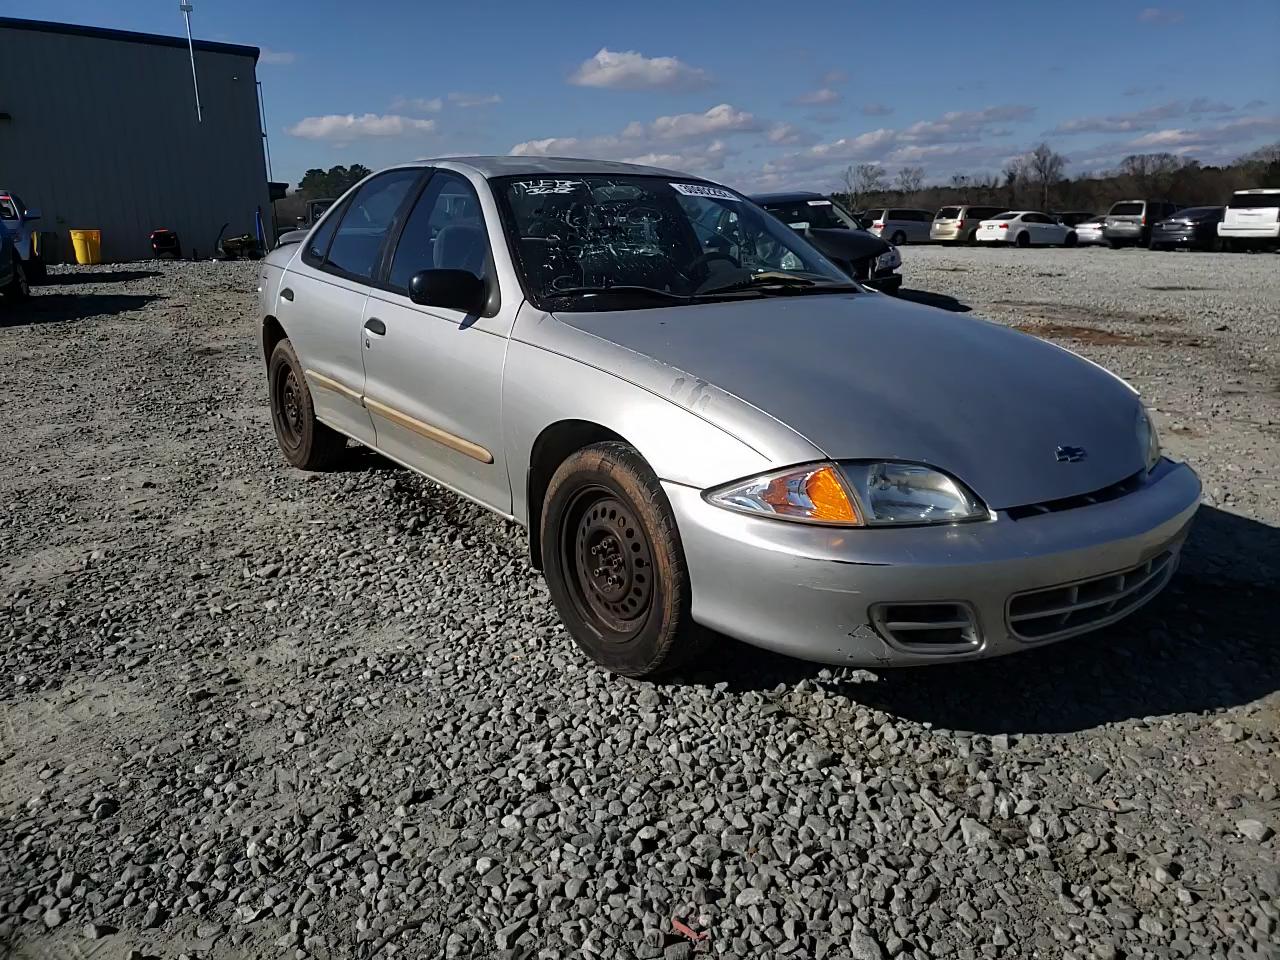 2000 CHEVROLET CAVALIER L - Other View